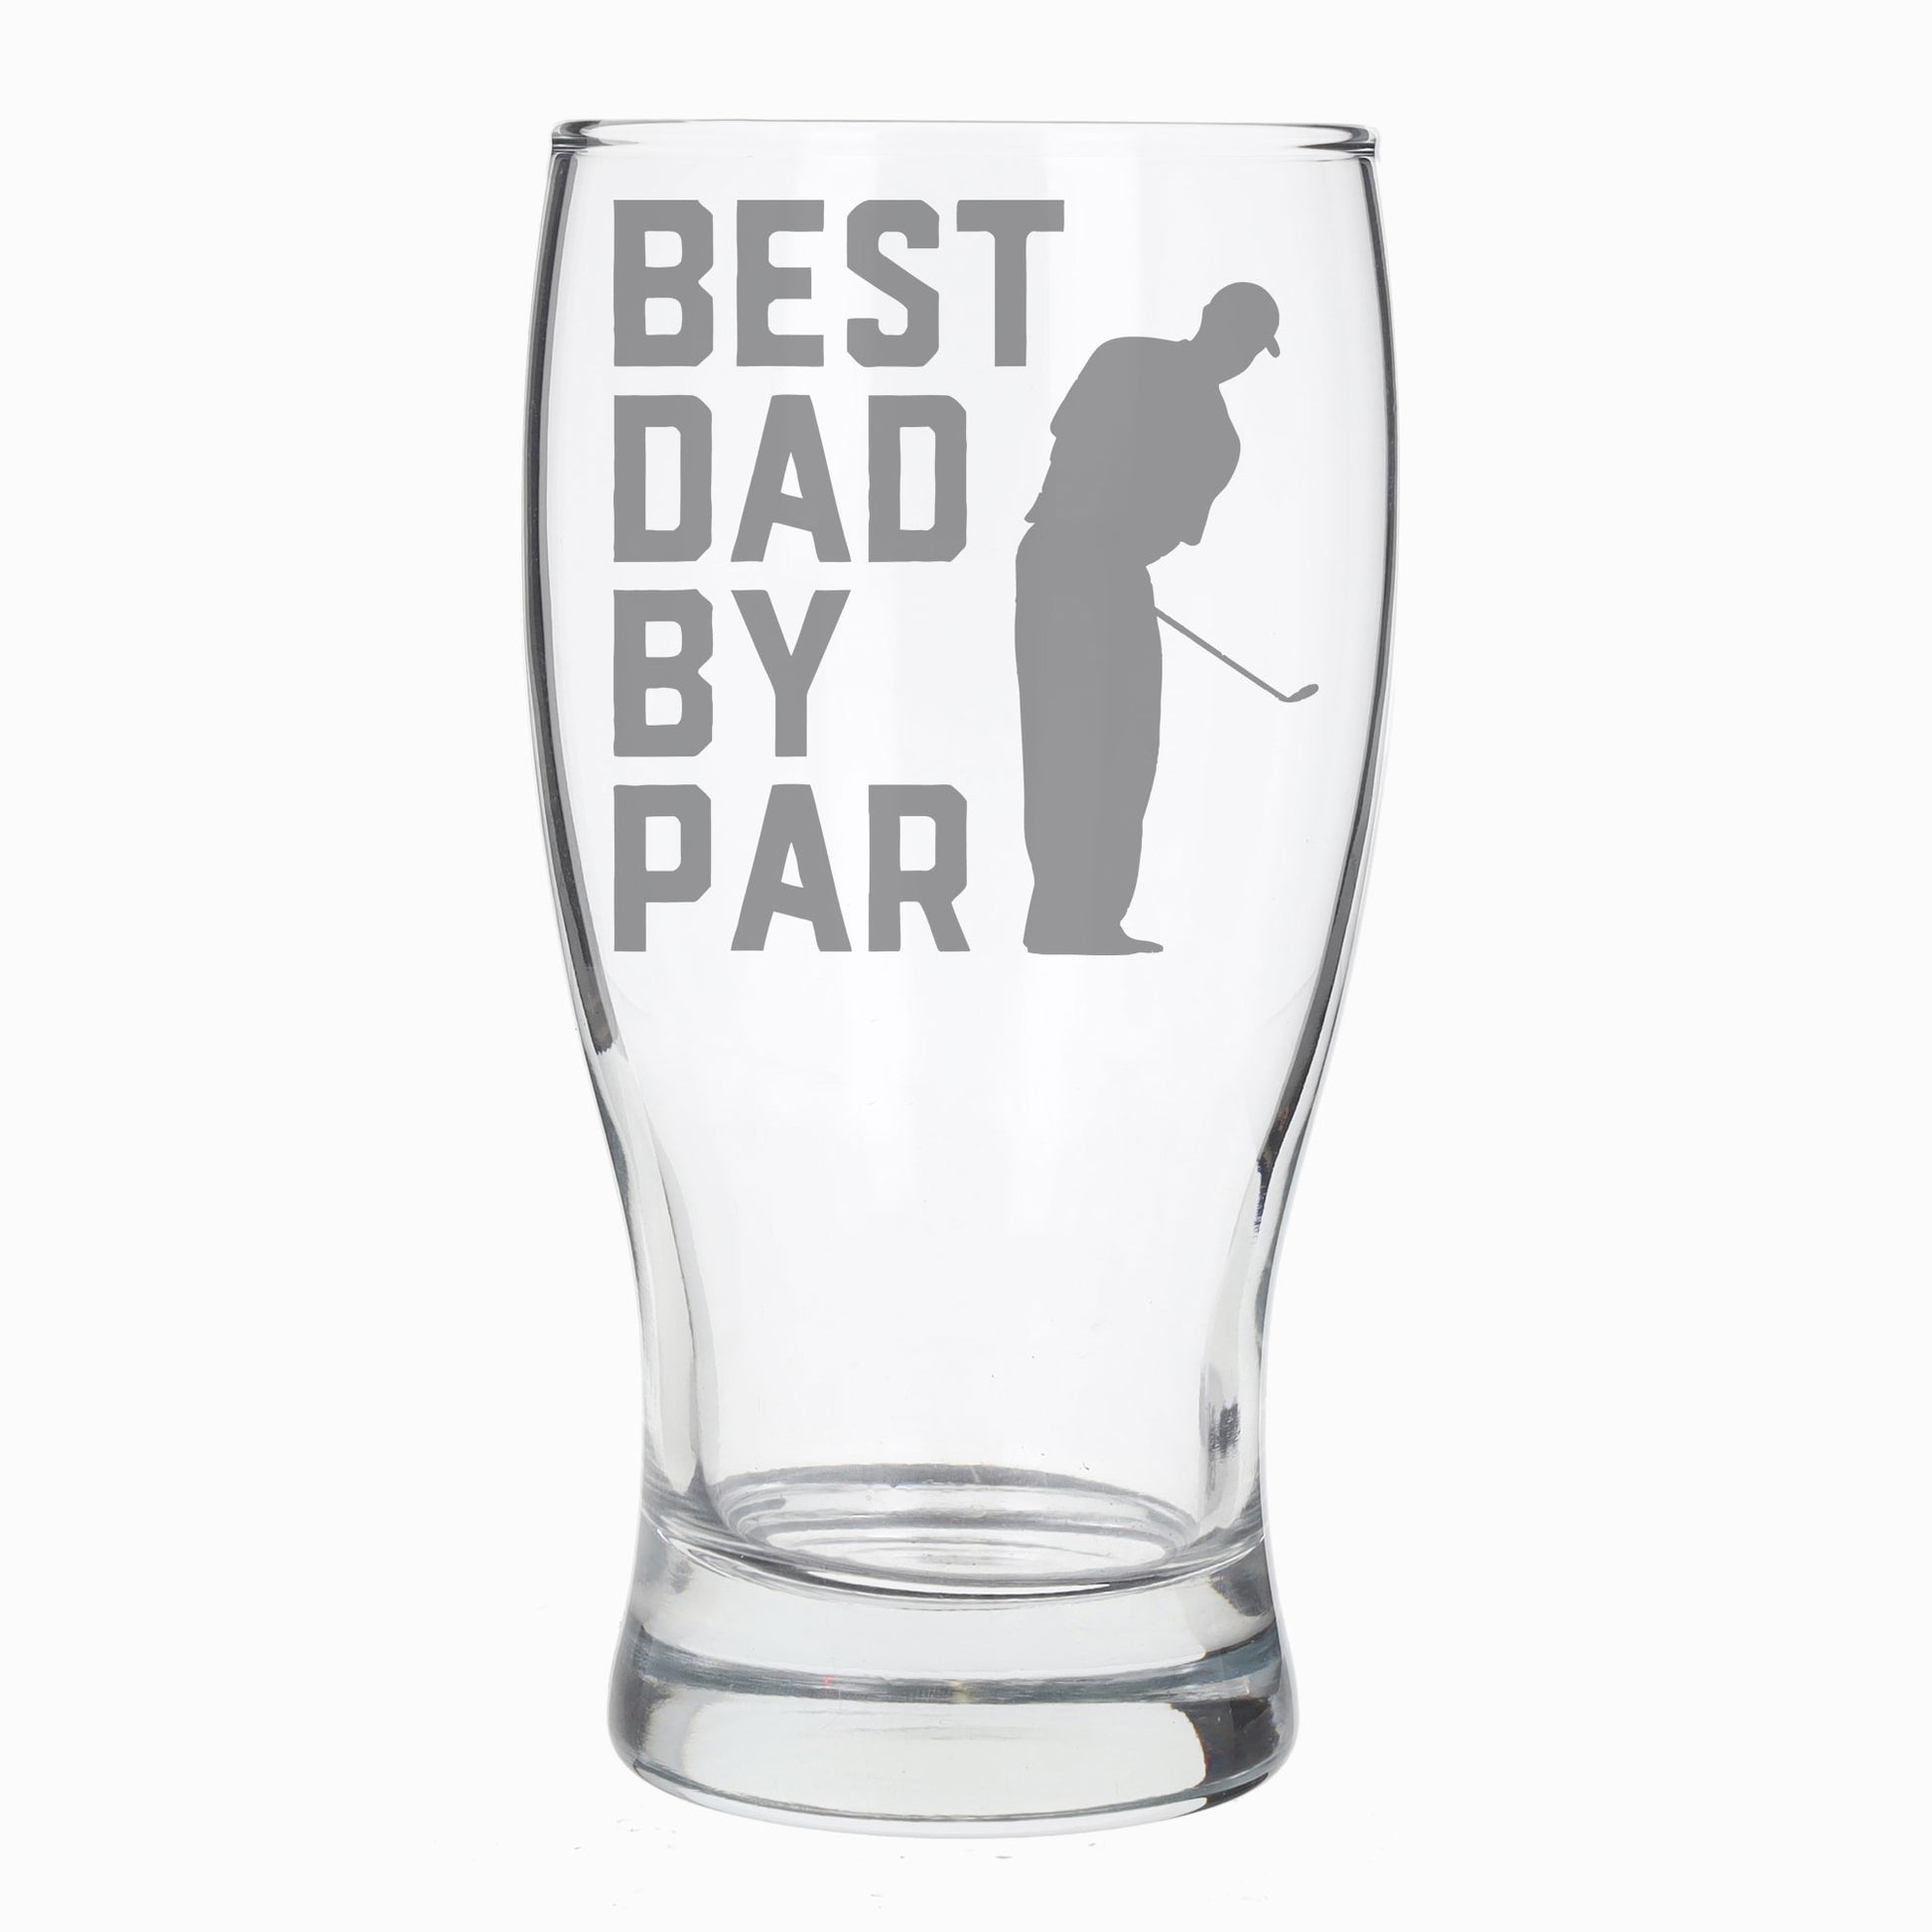 Best Dad By Par Engraved Beer Glass and/or Coaster Set  - Always Looking Good - Beer Glass Only  